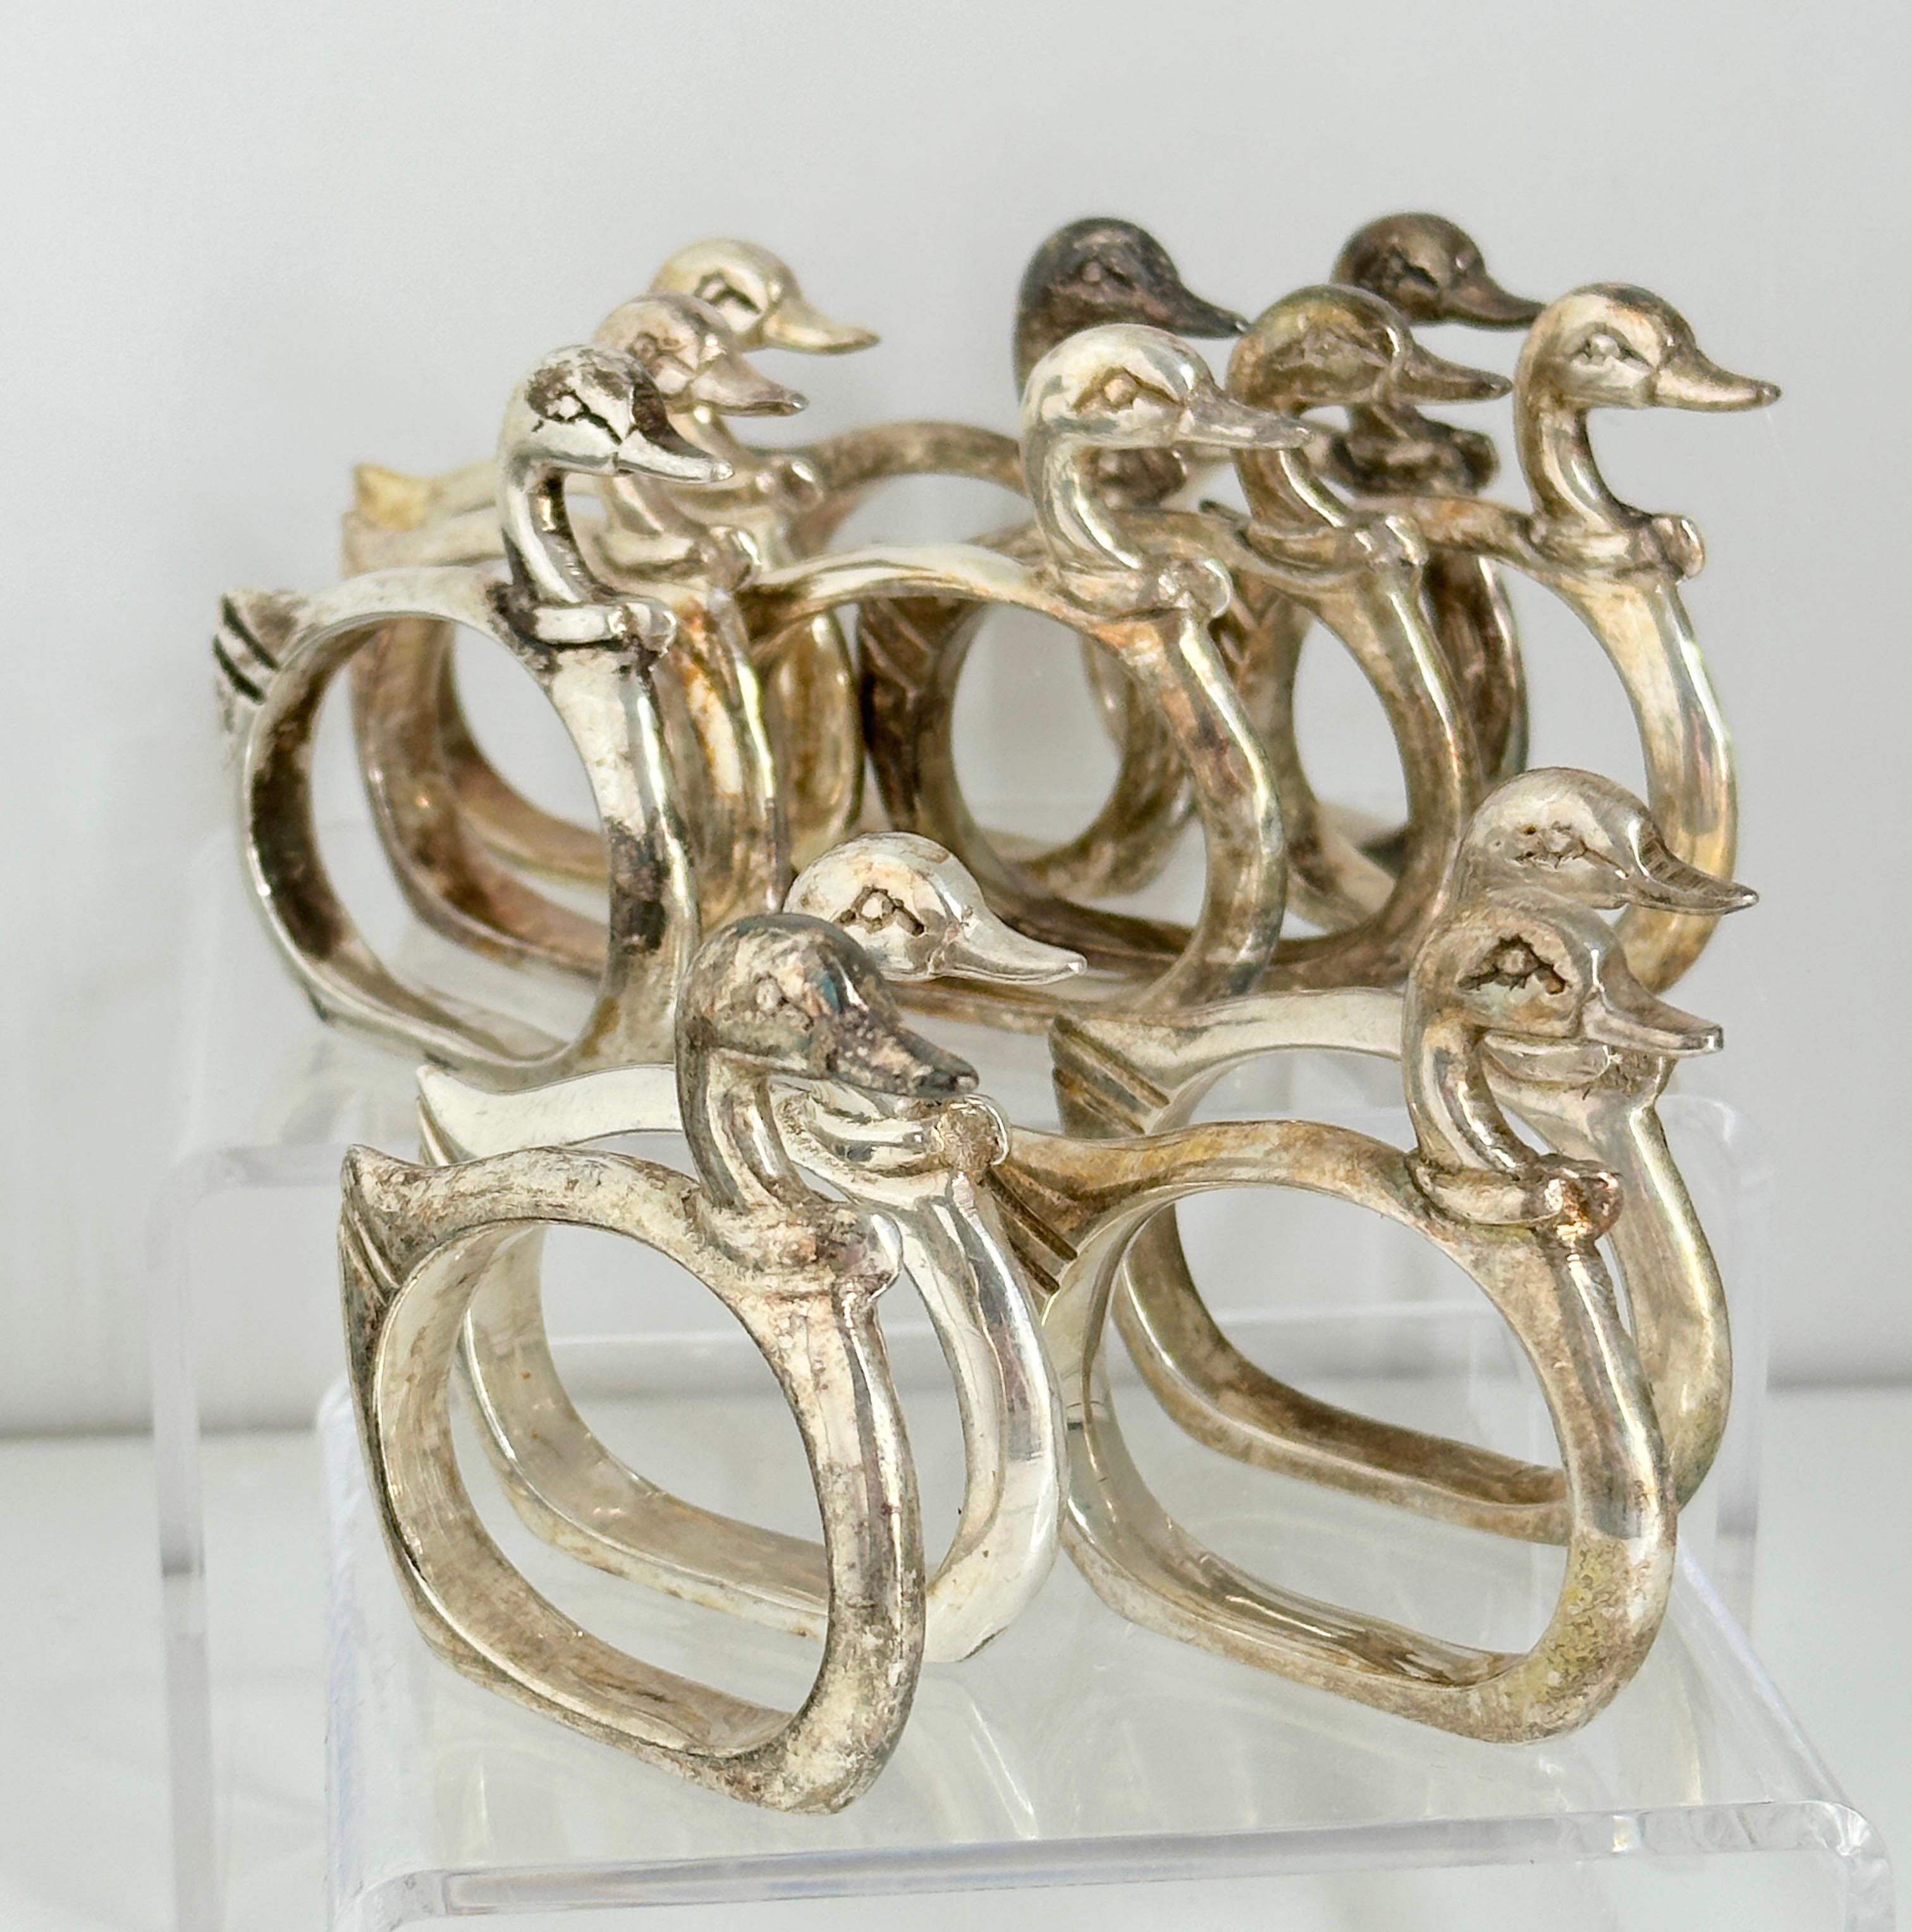 A set of twelve silver plated napkin rings, circa 1960s, made by unknown company. A nice set of round rings, in the style of the Art Nouveau era. All of them with a nice patina. Can be cleaned from the new owner, but also give the table a classic